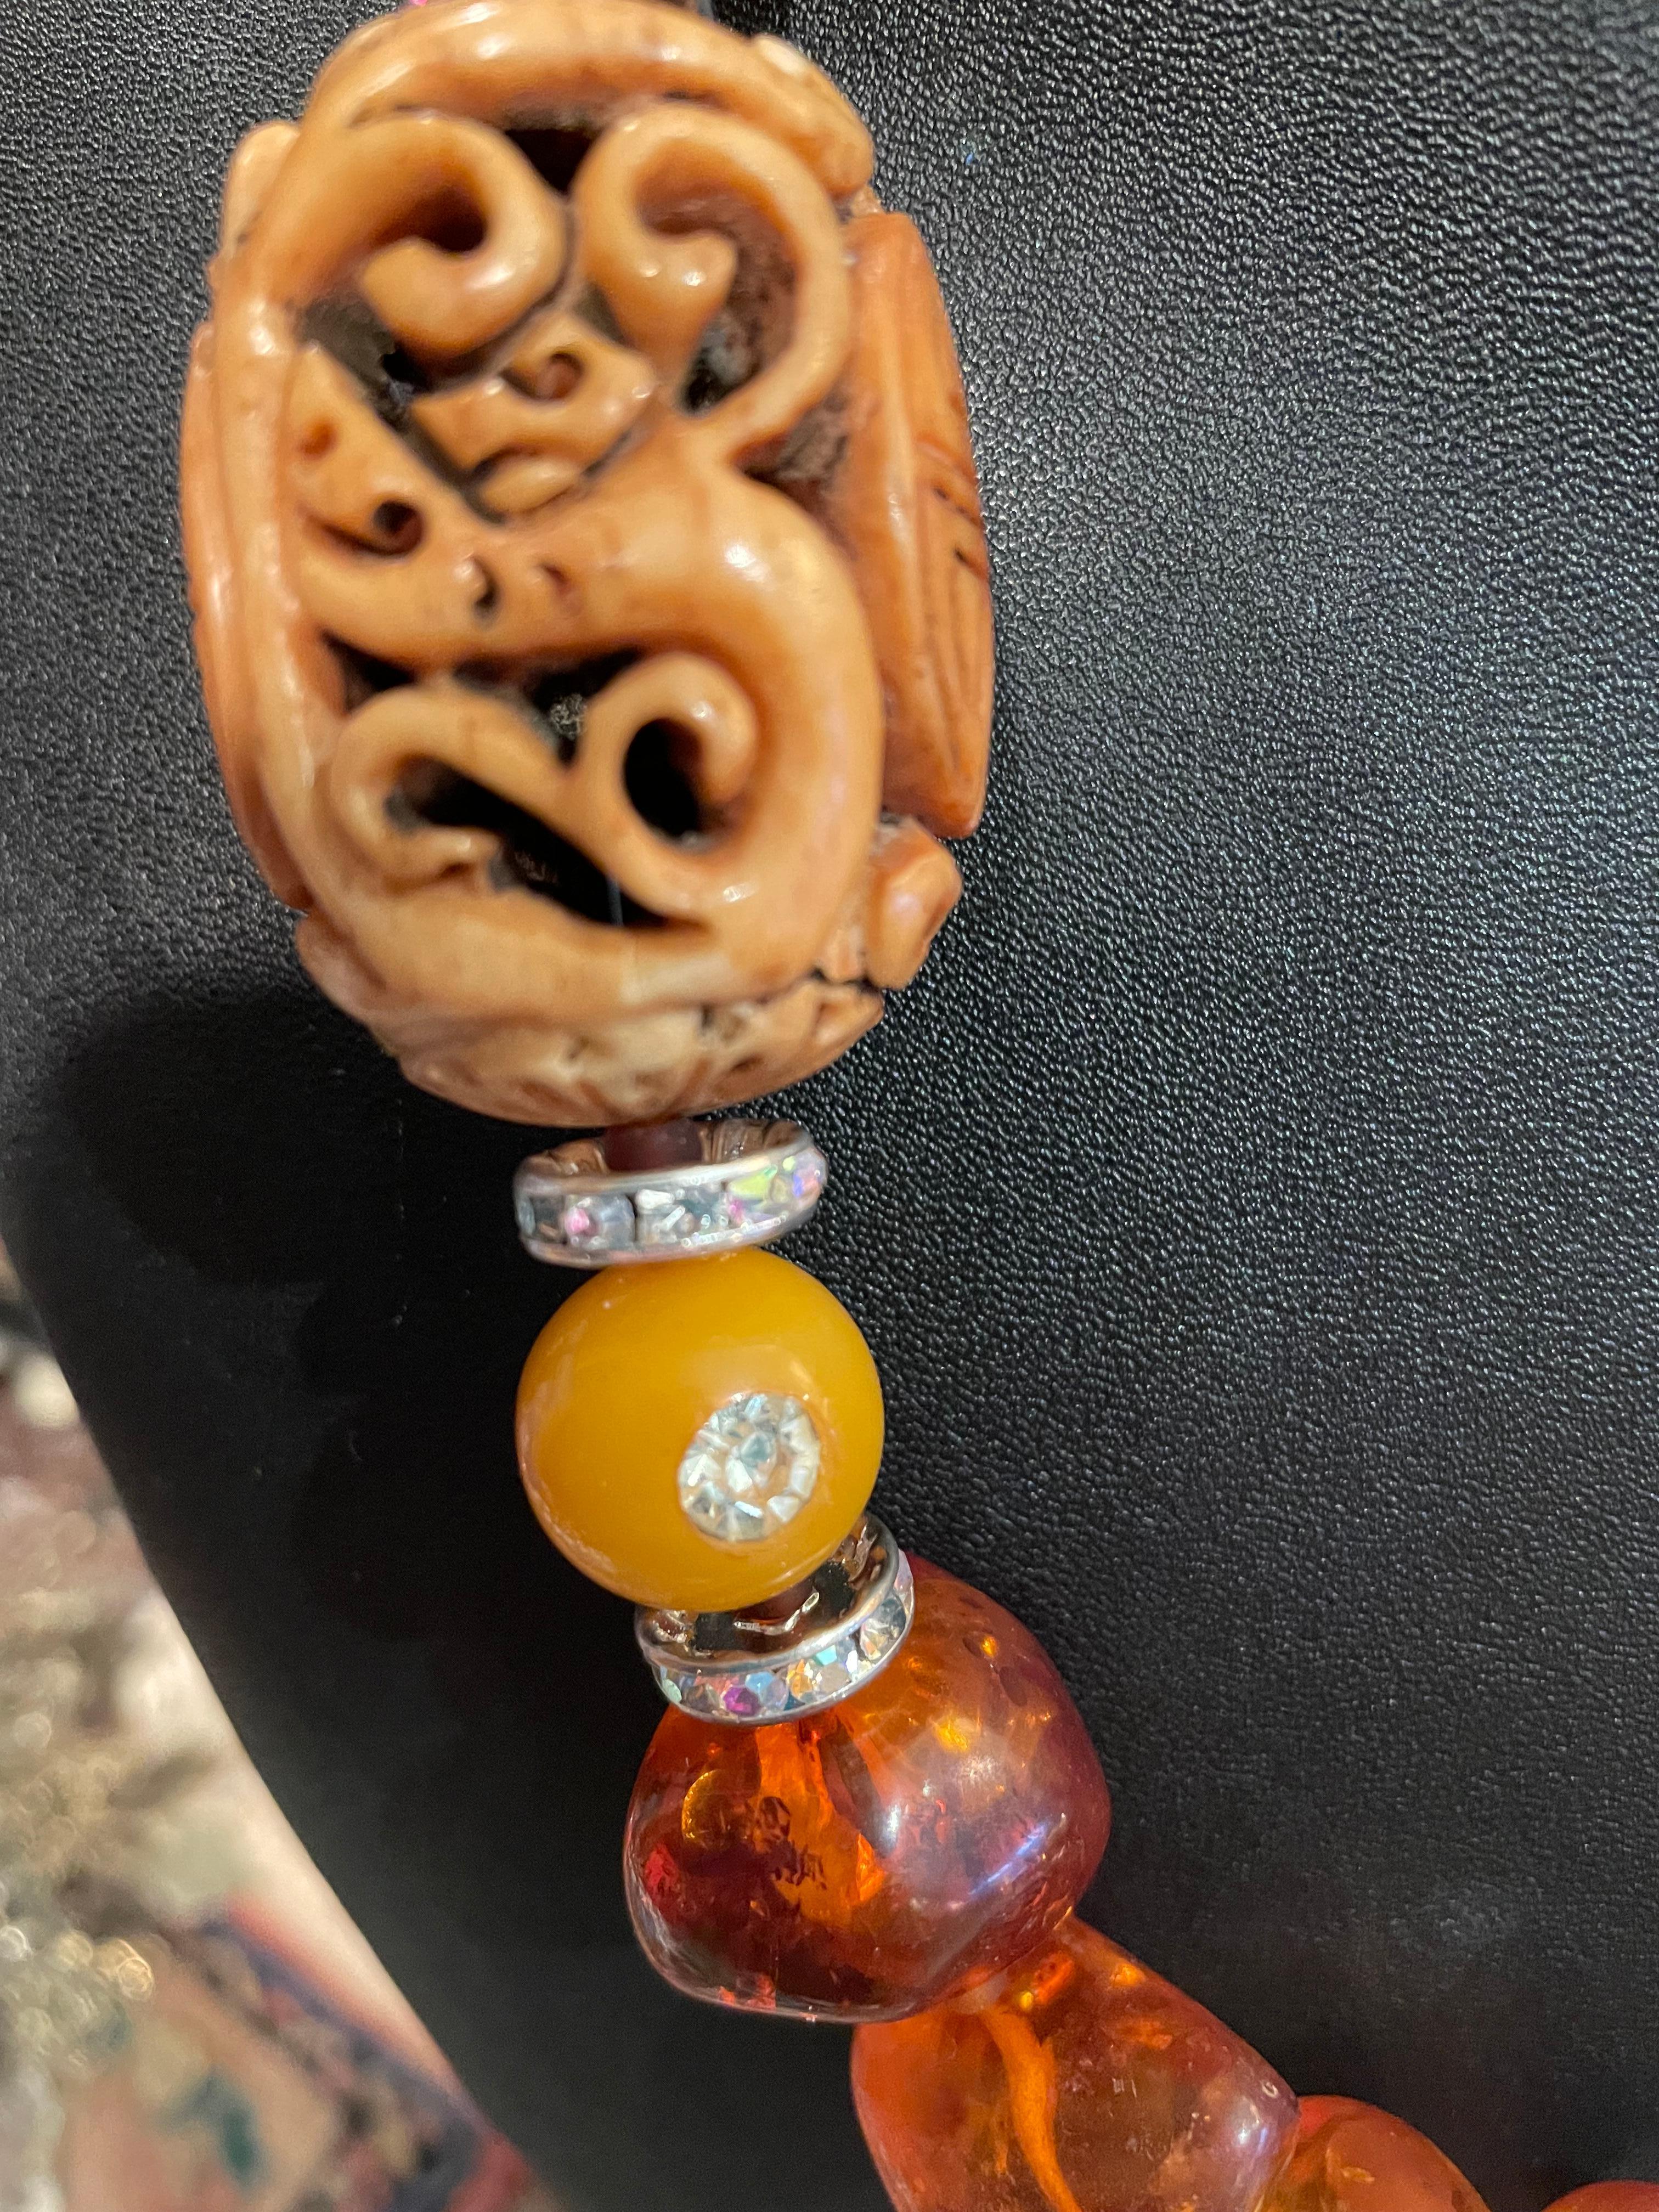 Large chunks of polished Baltic Amber,vintage carved Chinese soapstone bead,vintage Bakelite beads,large Baroque pearls and crystal rondelles comprise this one of a kind ,handmade,necklace. A fabulous offering from Lorraine’s Bijoux and is a real